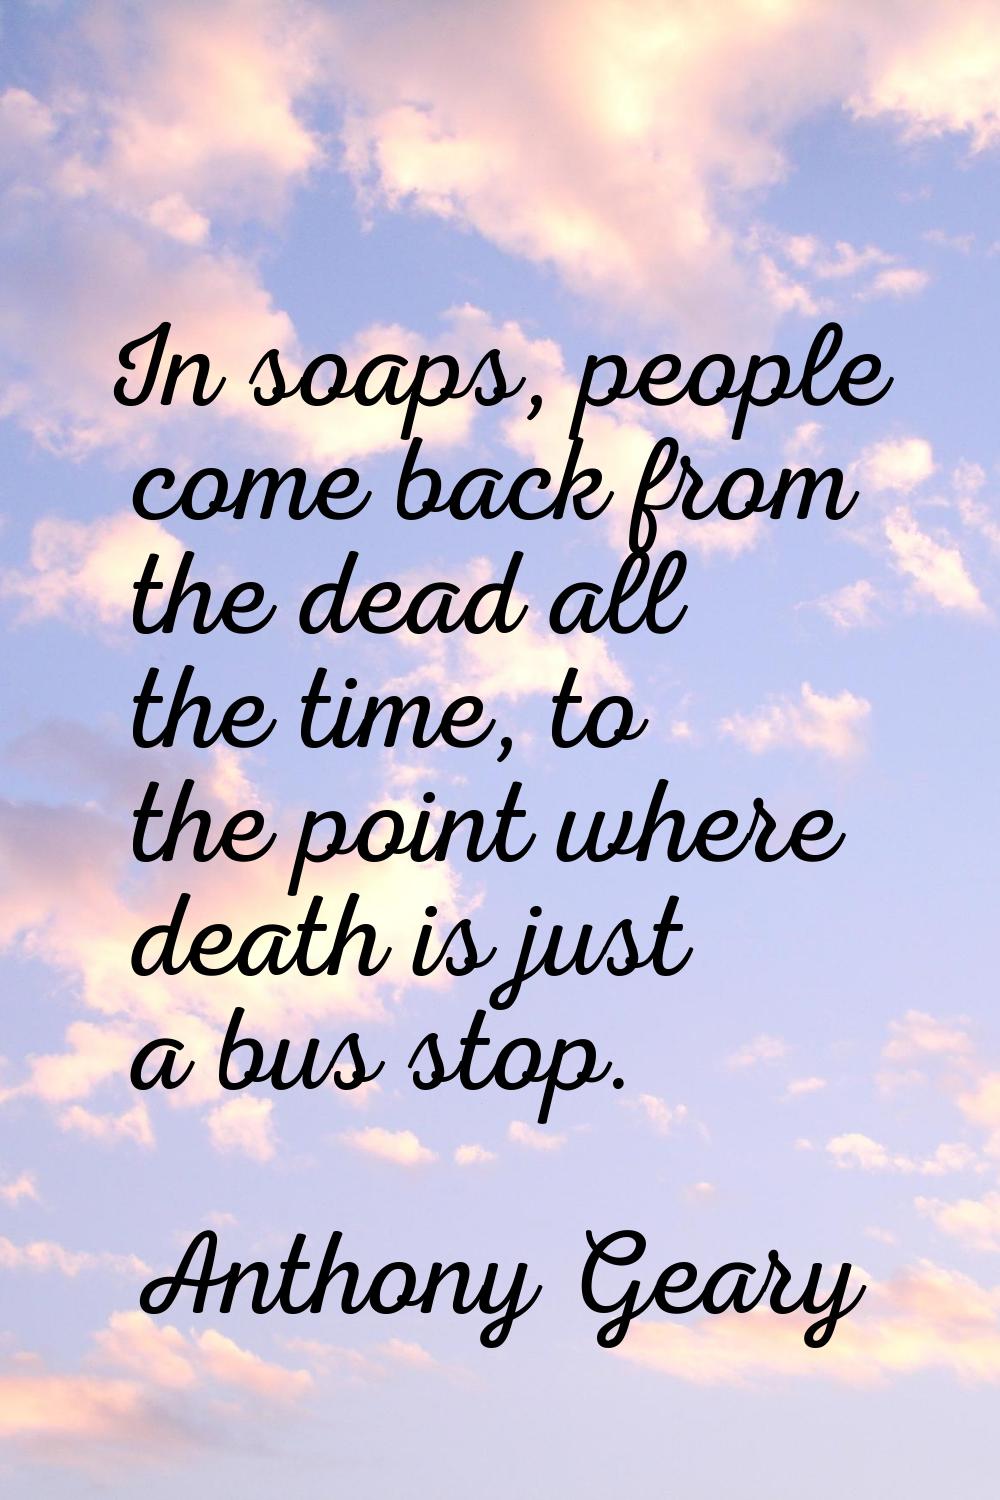 In soaps, people come back from the dead all the time, to the point where death is just a bus stop.